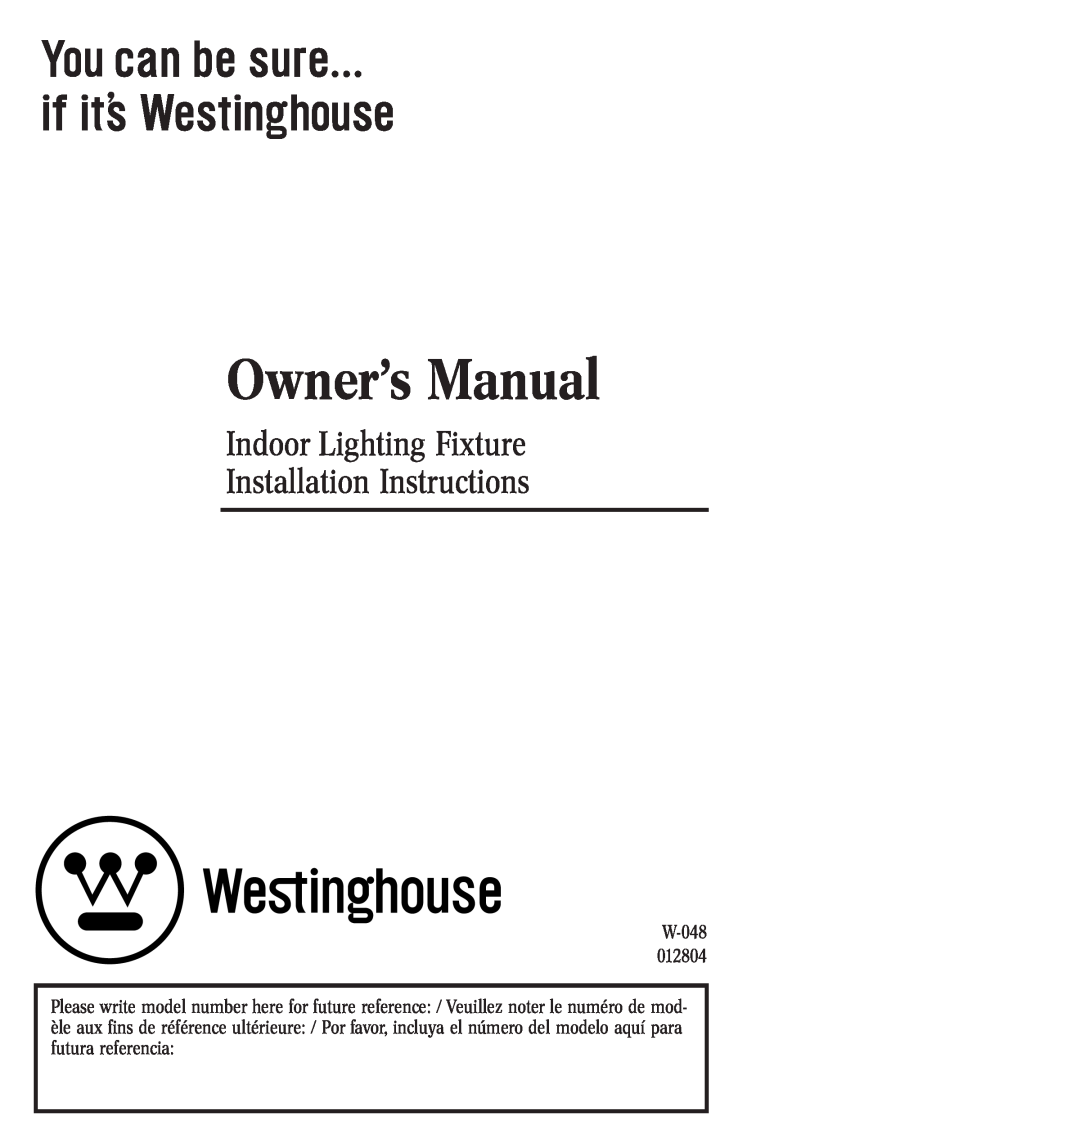 Westinghouse 60612, W-048 owner manual Indoor Lighting Fixture Installation Instructions 